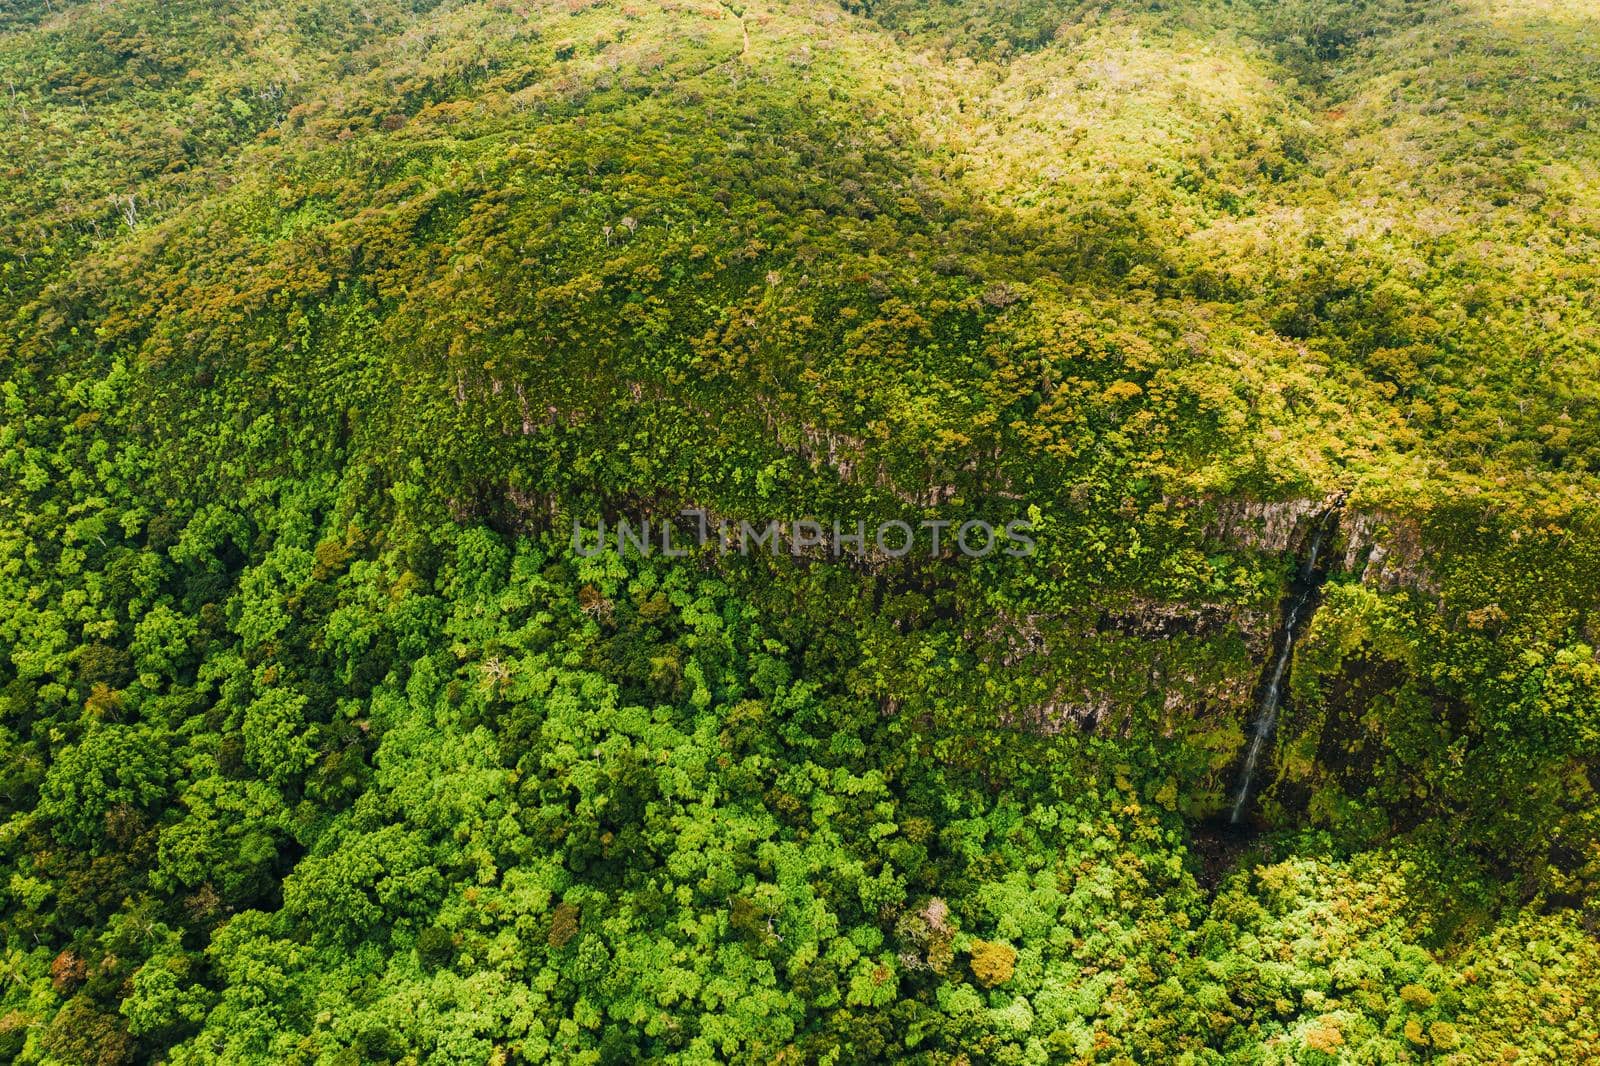 Bird's-eye view of the mountains and fields of the island of Mauritius.Landscapes Of Mauritius. by Lobachad